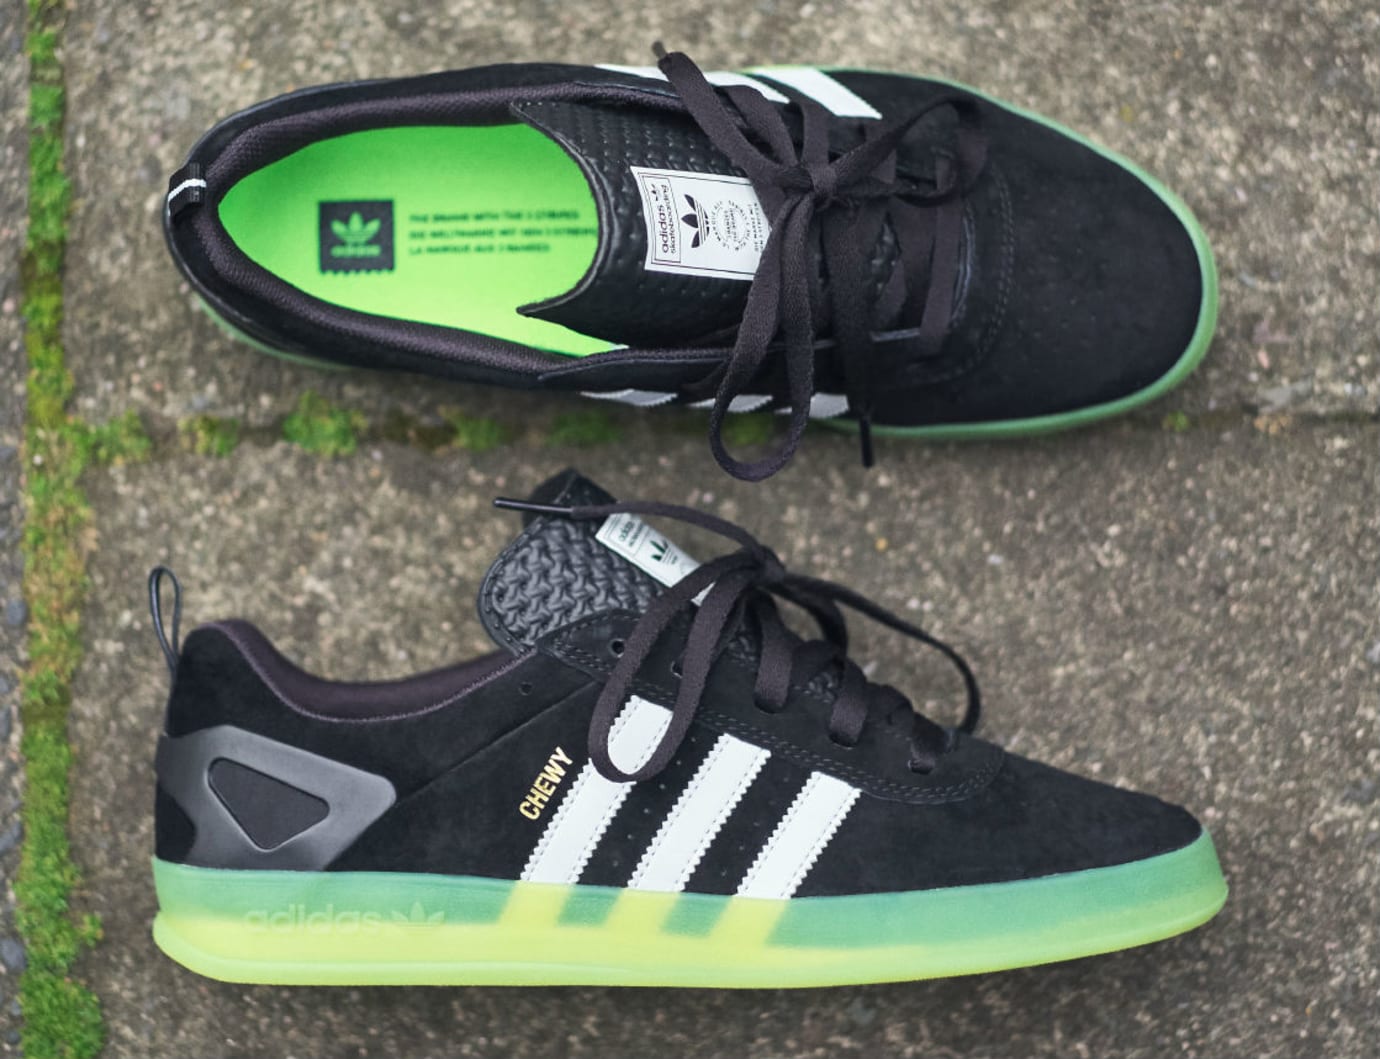 Adidas Palace Pro Benny Fairfax & Chewy Cannon Release Date | Sole 